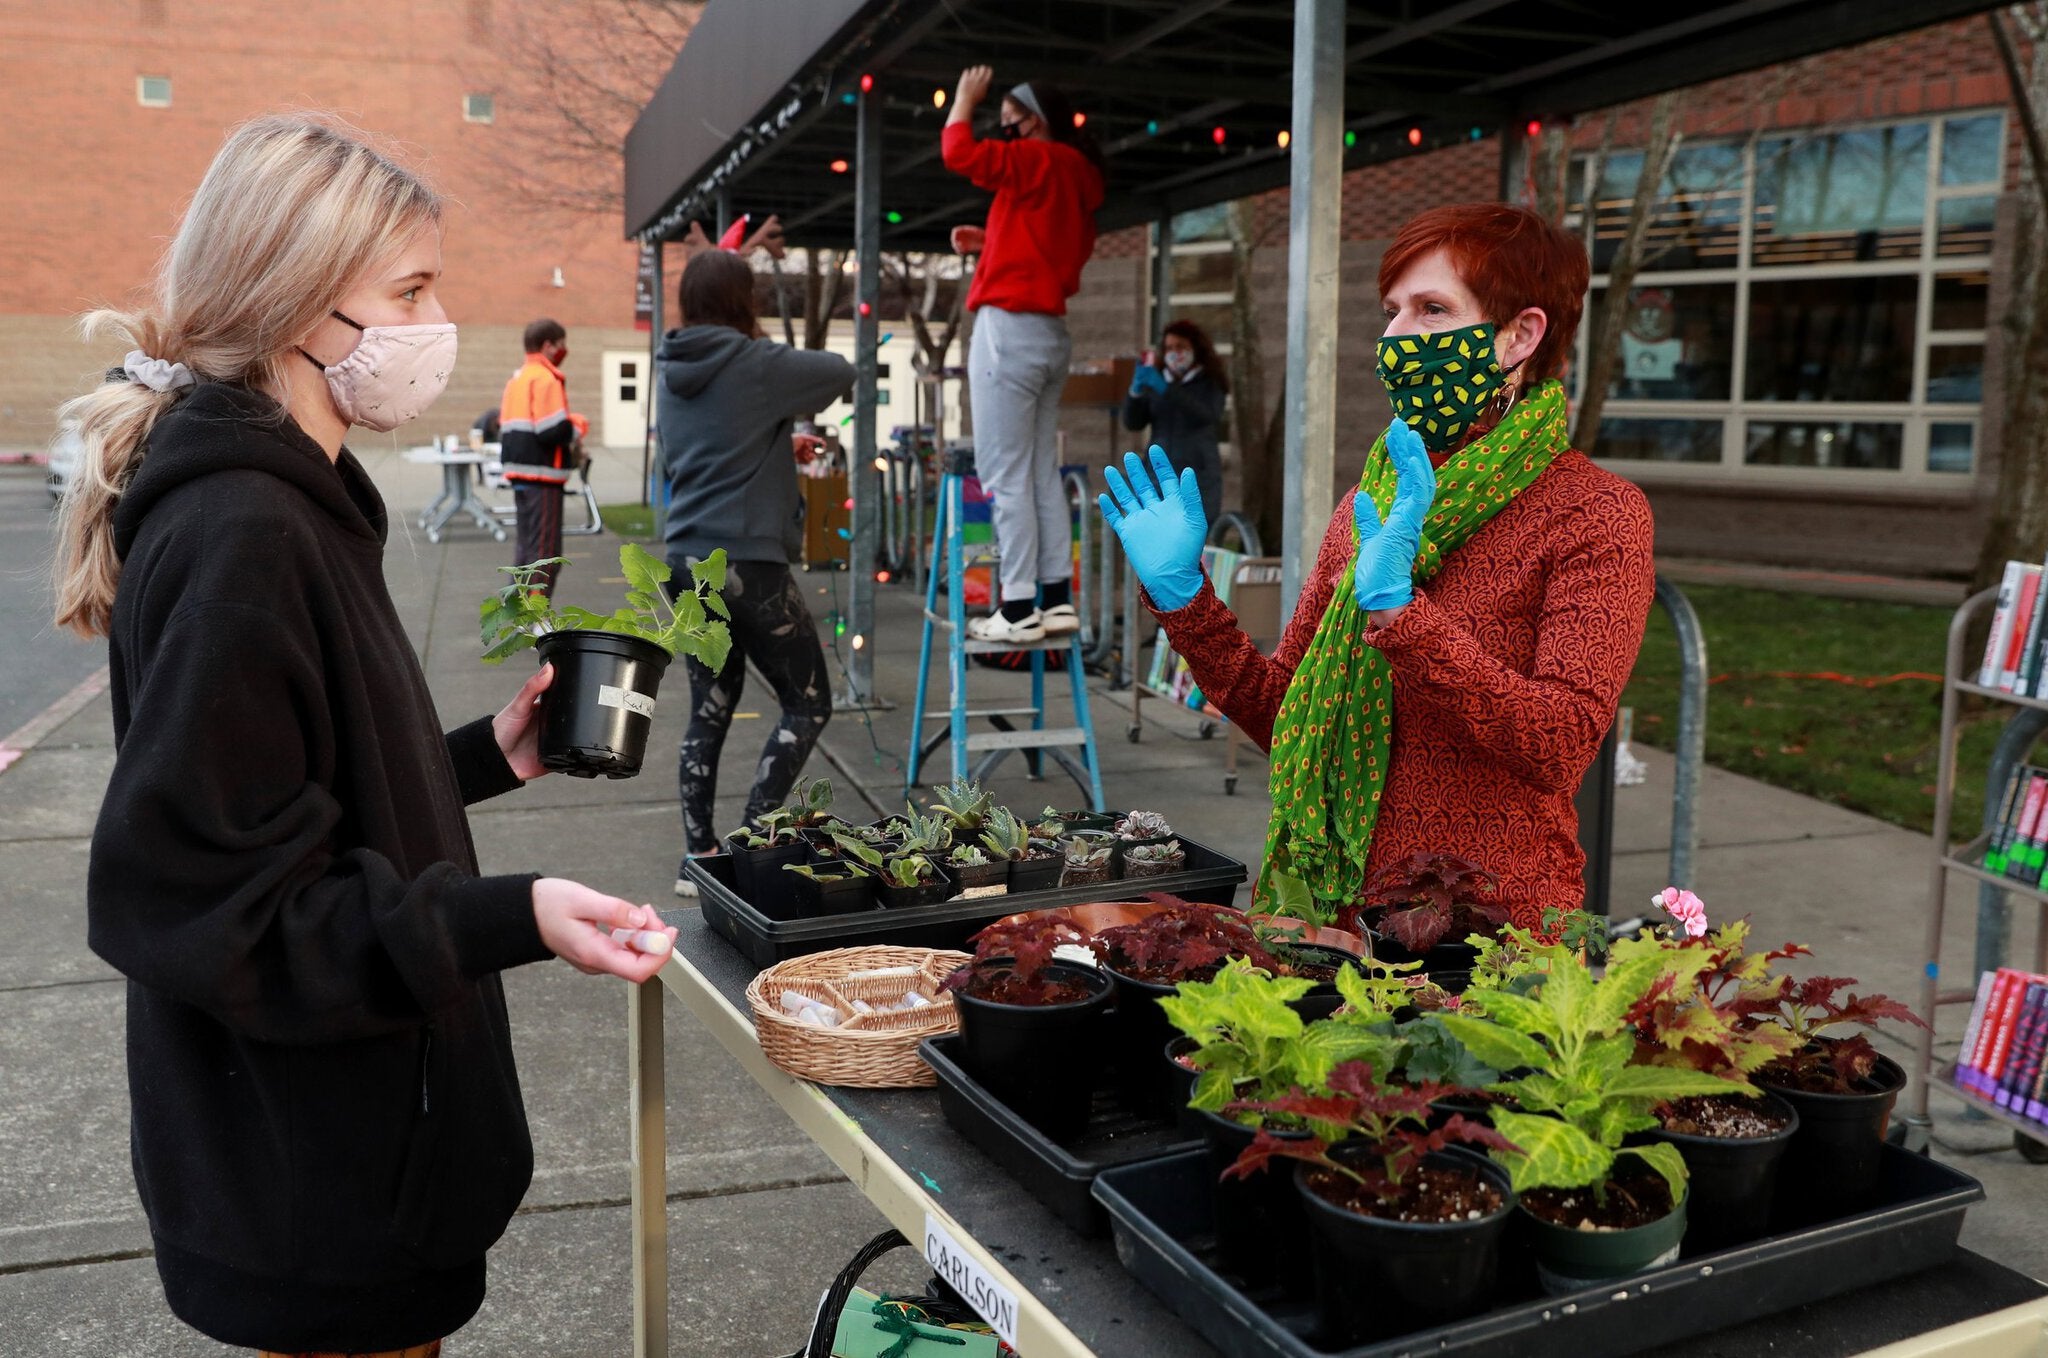 India Carlson, right, who teaches botany and environmental horticulture, speaks with Ballard High School student Norah Bunnell, 17, during a curbside pickup event at the school Dec. 10. (Erika Schultz / The Seattle Times)